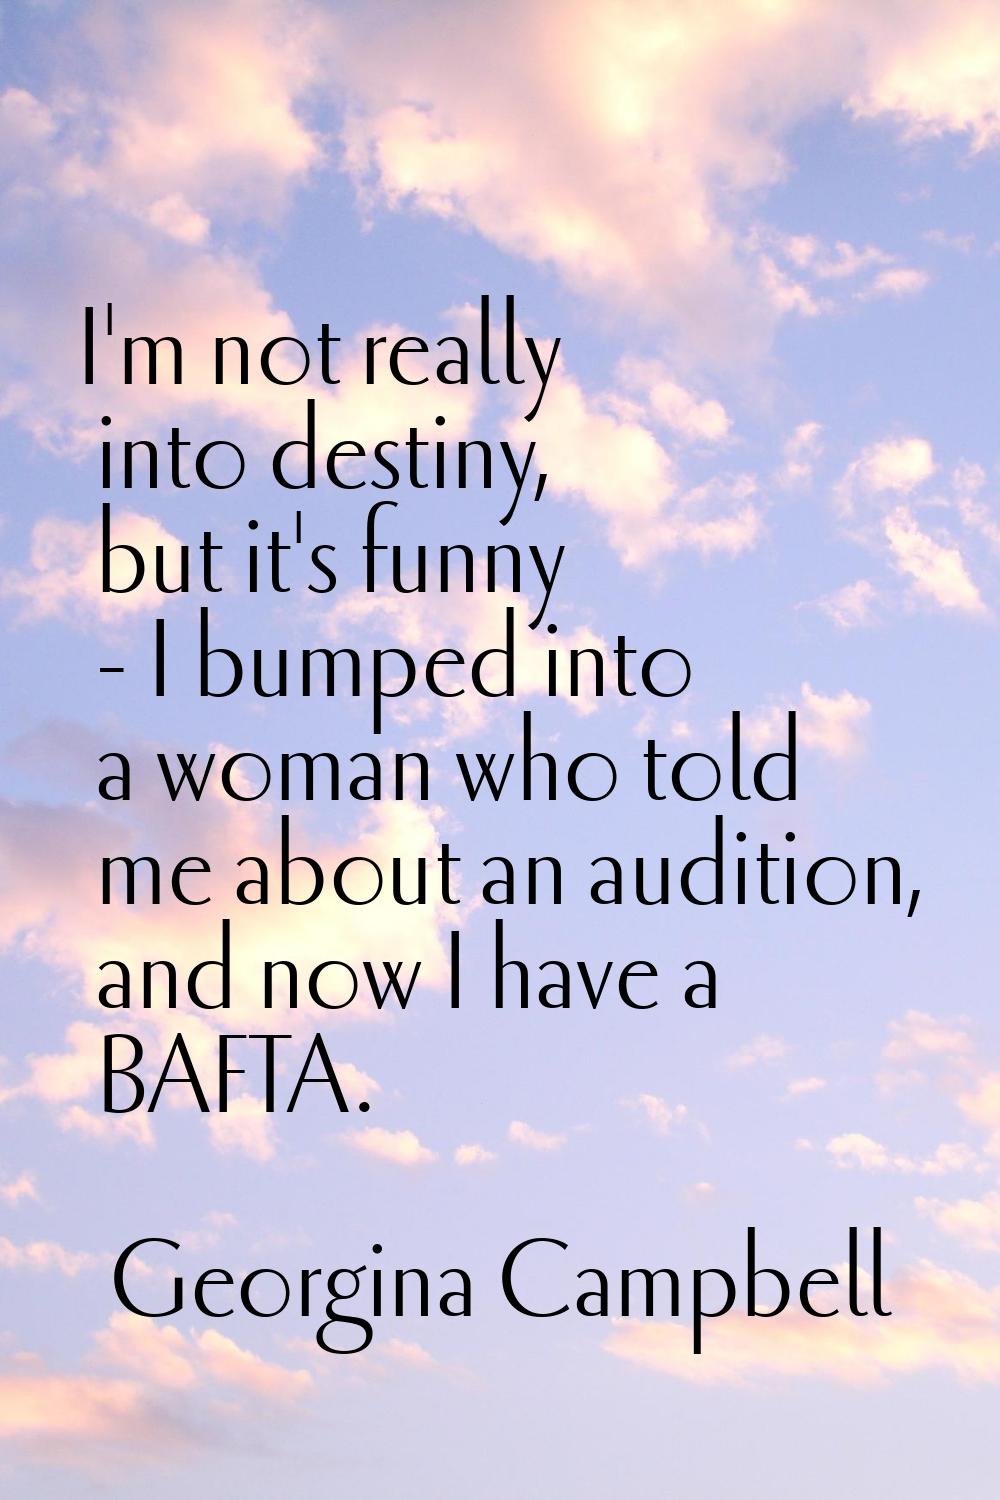 I'm not really into destiny, but it's funny - I bumped into a woman who told me about an audition, 